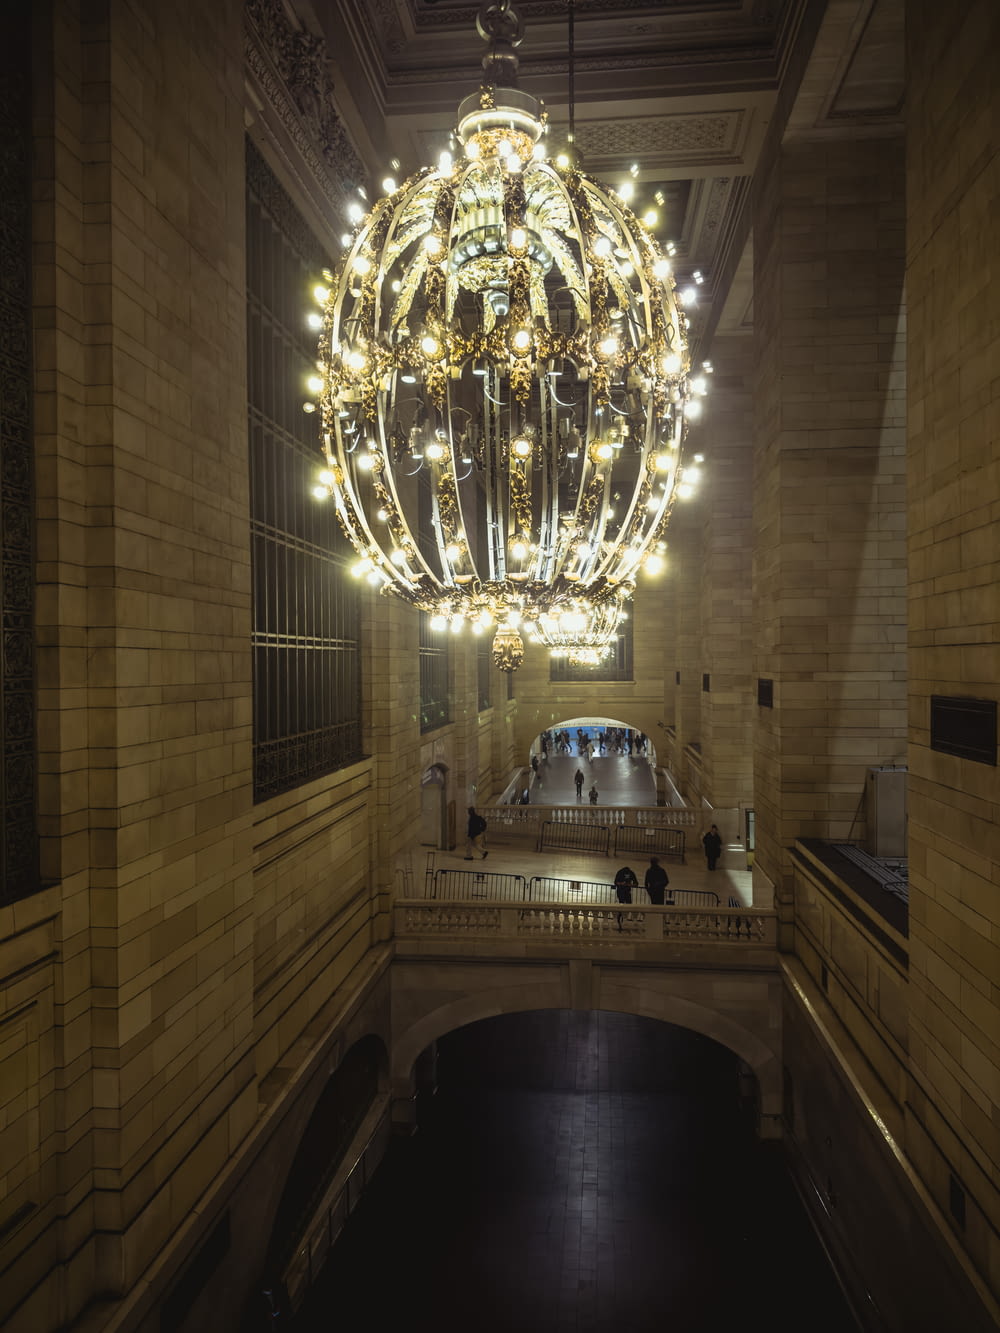 a large chandelier in a building